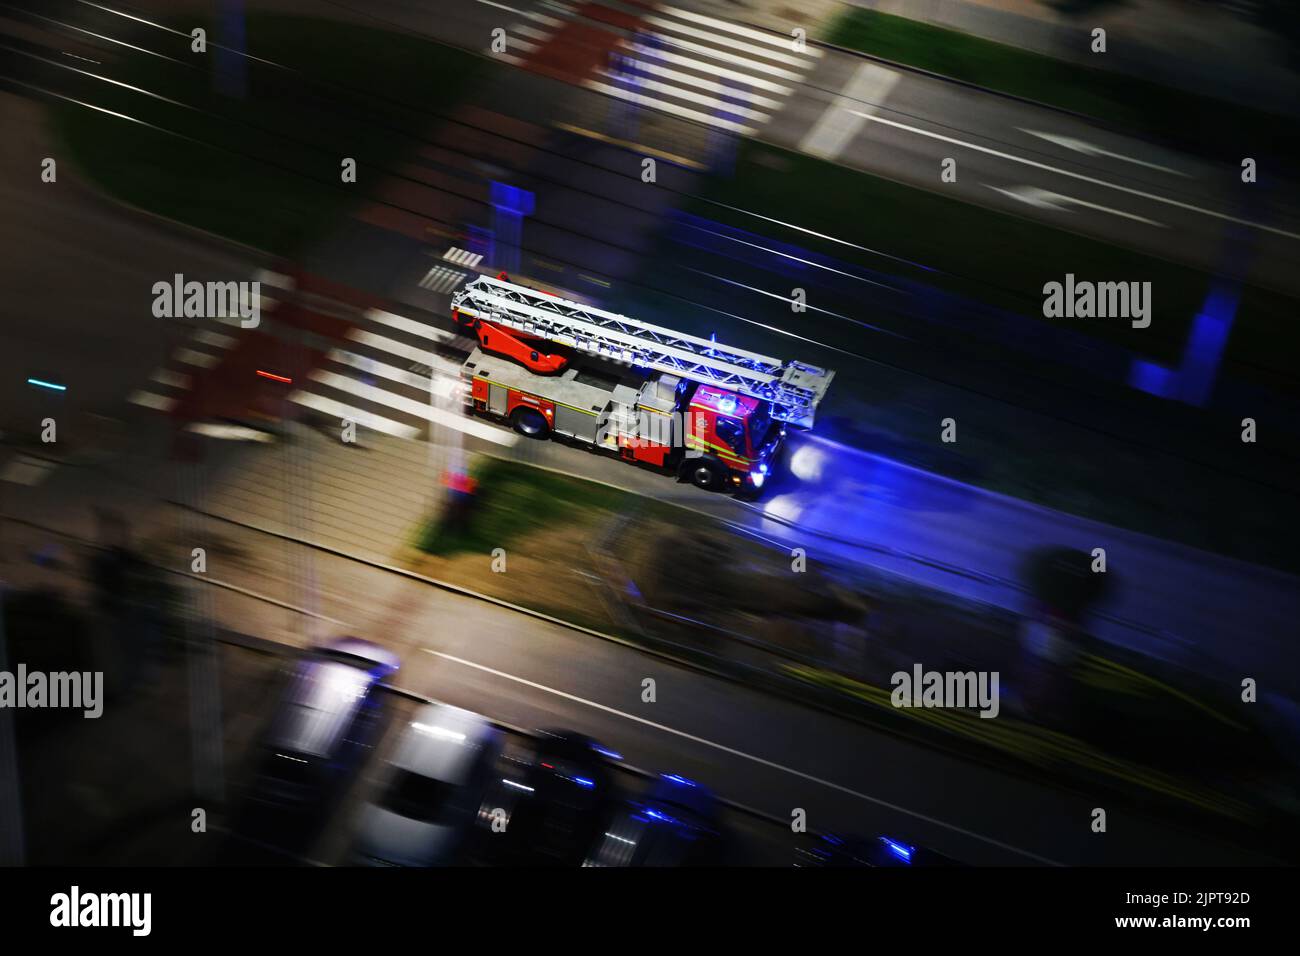 Rescue trucks on a call during Monday night in the city of Gotheburg, Sweden. Stock Photo